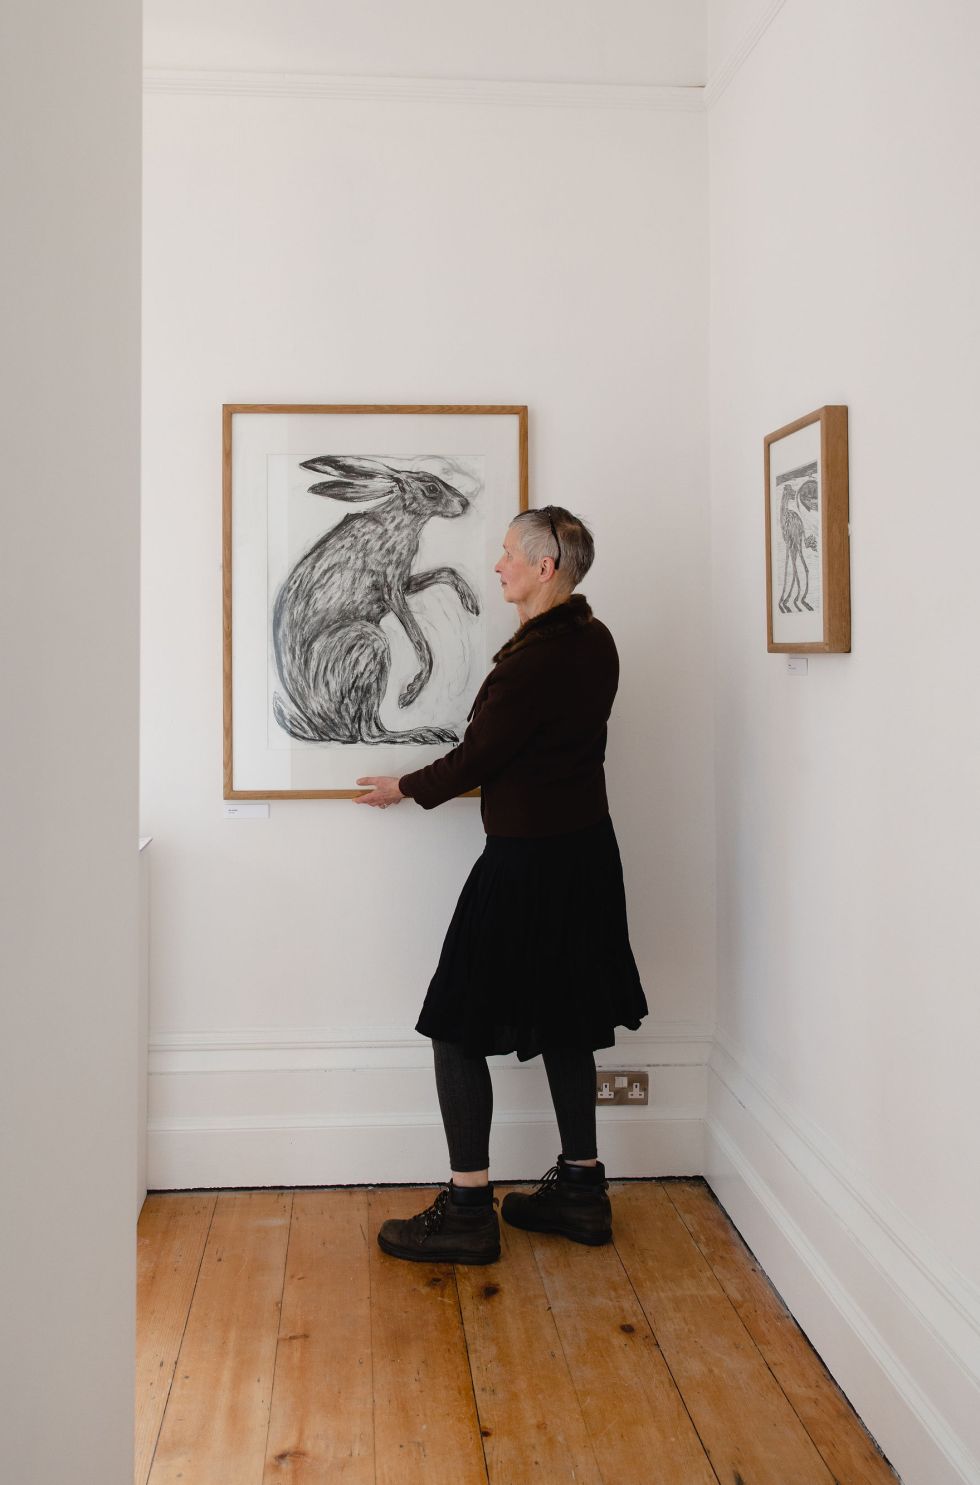 Marjan Wouda with her Hare illustration on display at The Whitaker Gallery. Image by Christina Davies, Fish2Photo